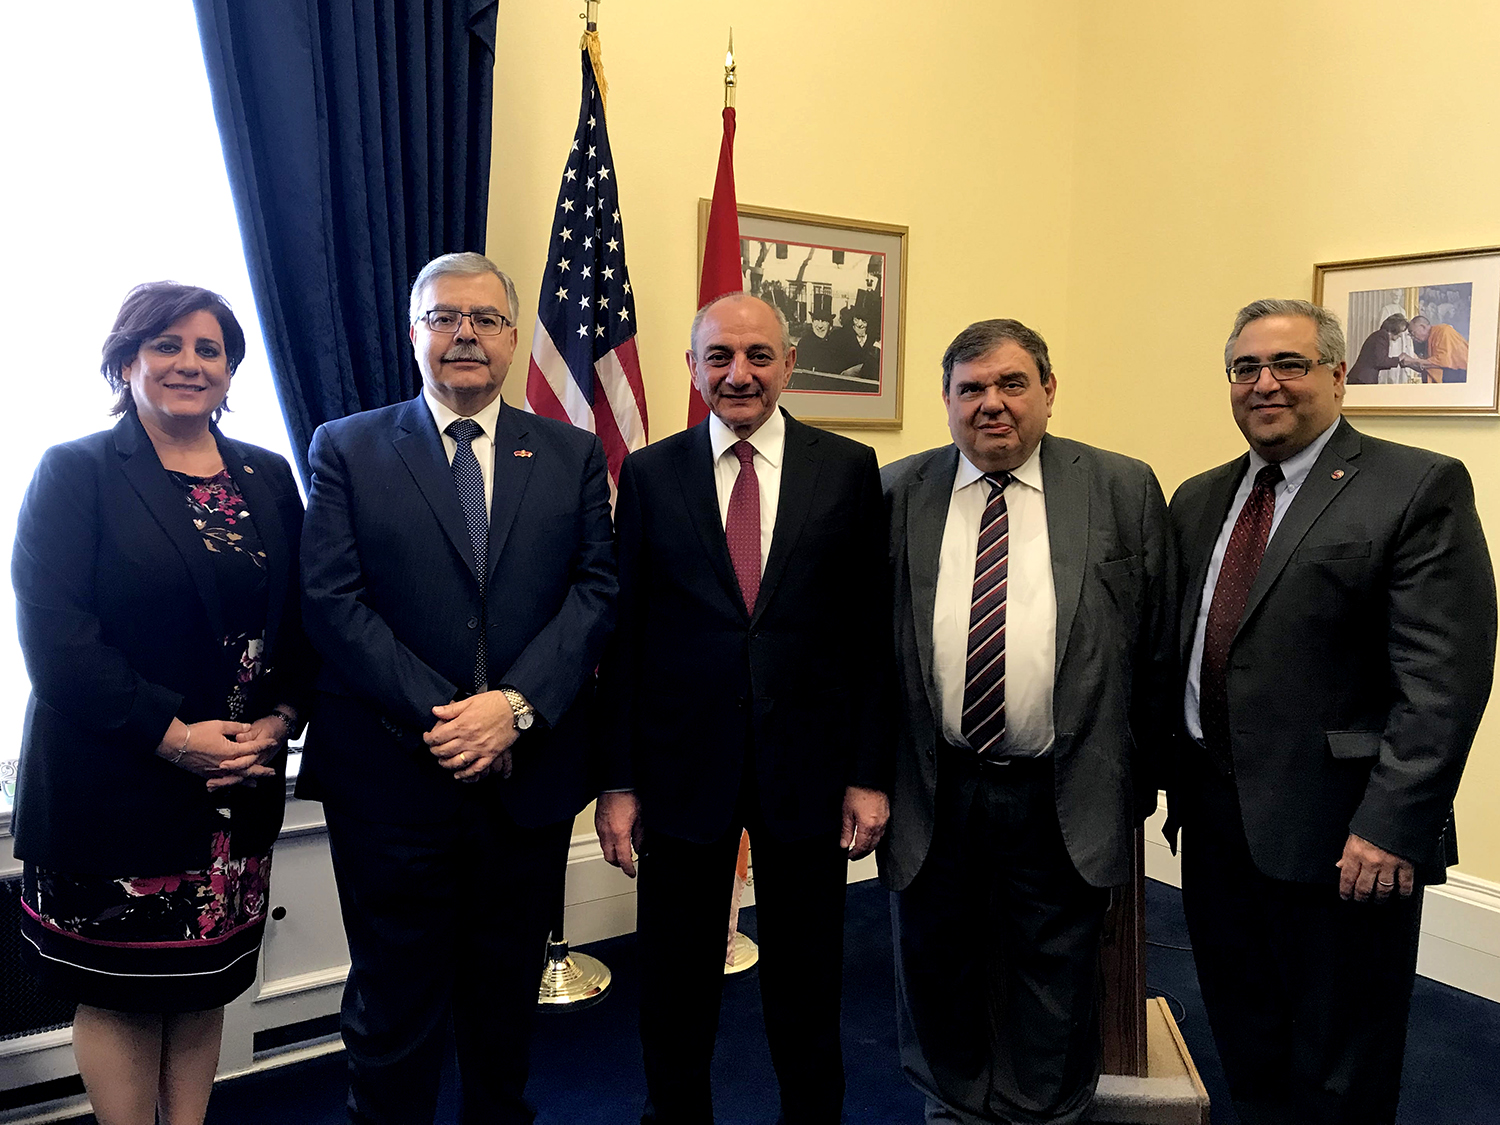 ANCA welcomes Artsakh President Sahakyan’s powerful message of peace and prosperity at U.S. Capitol